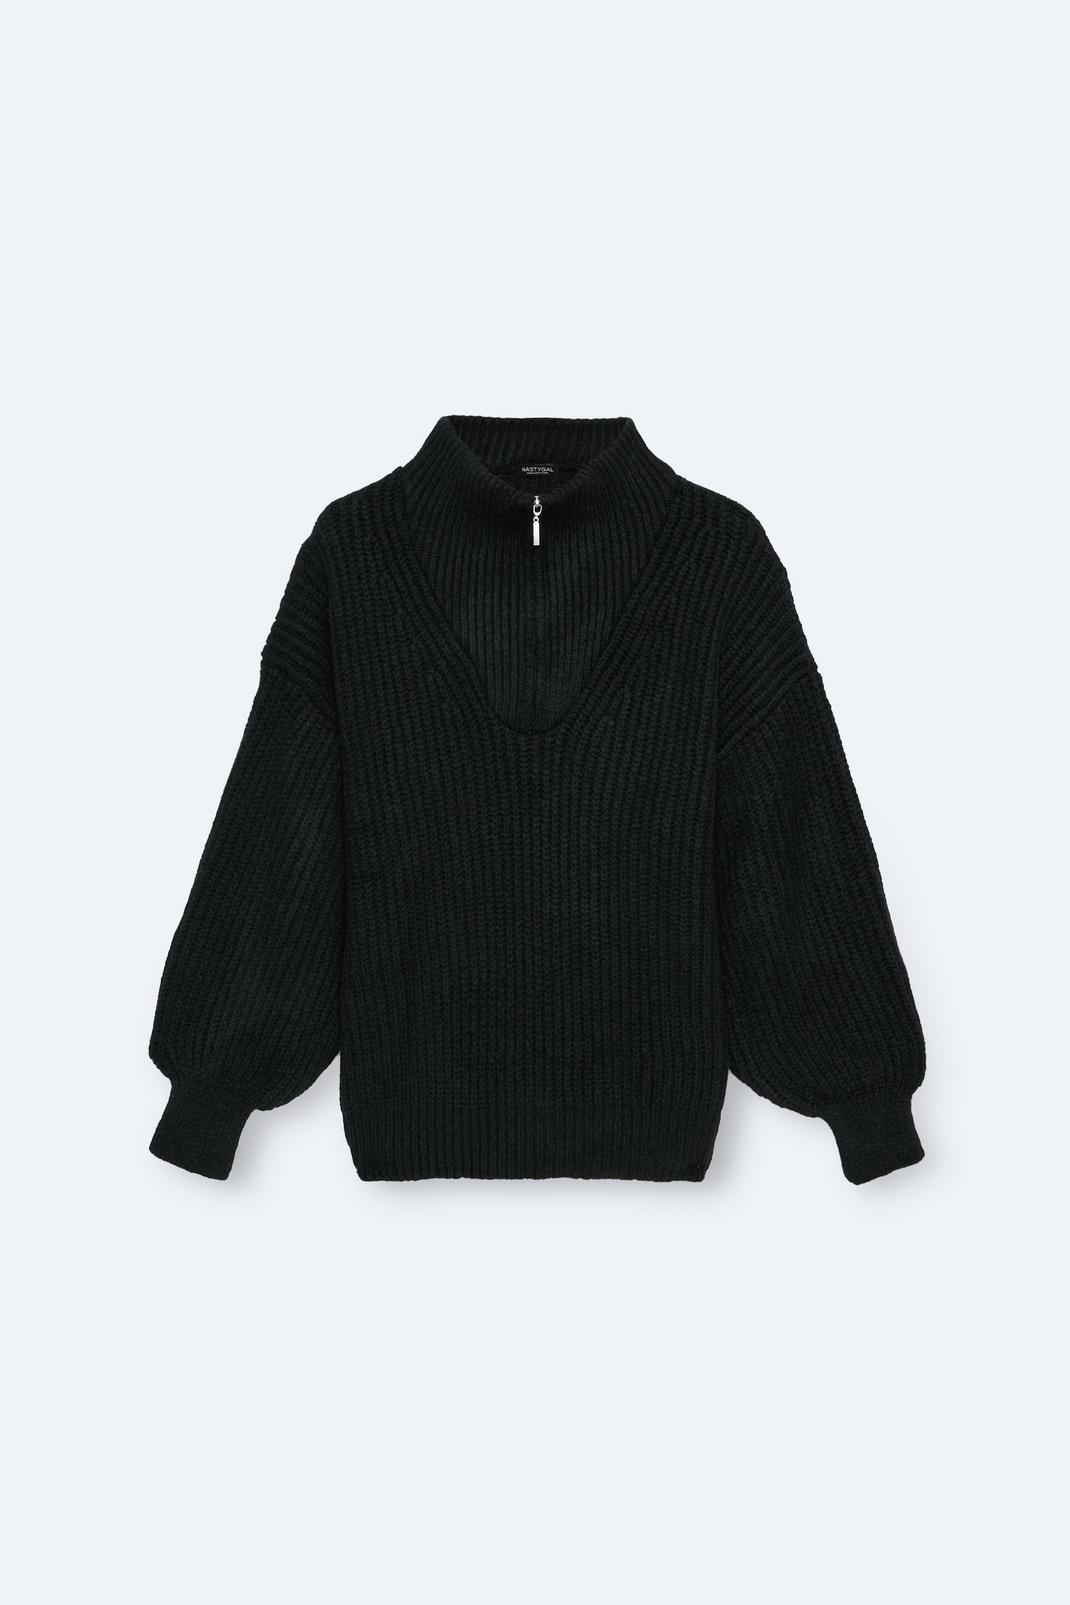 Black High Neck Quarter Zip Slouchy Sweater image number 1